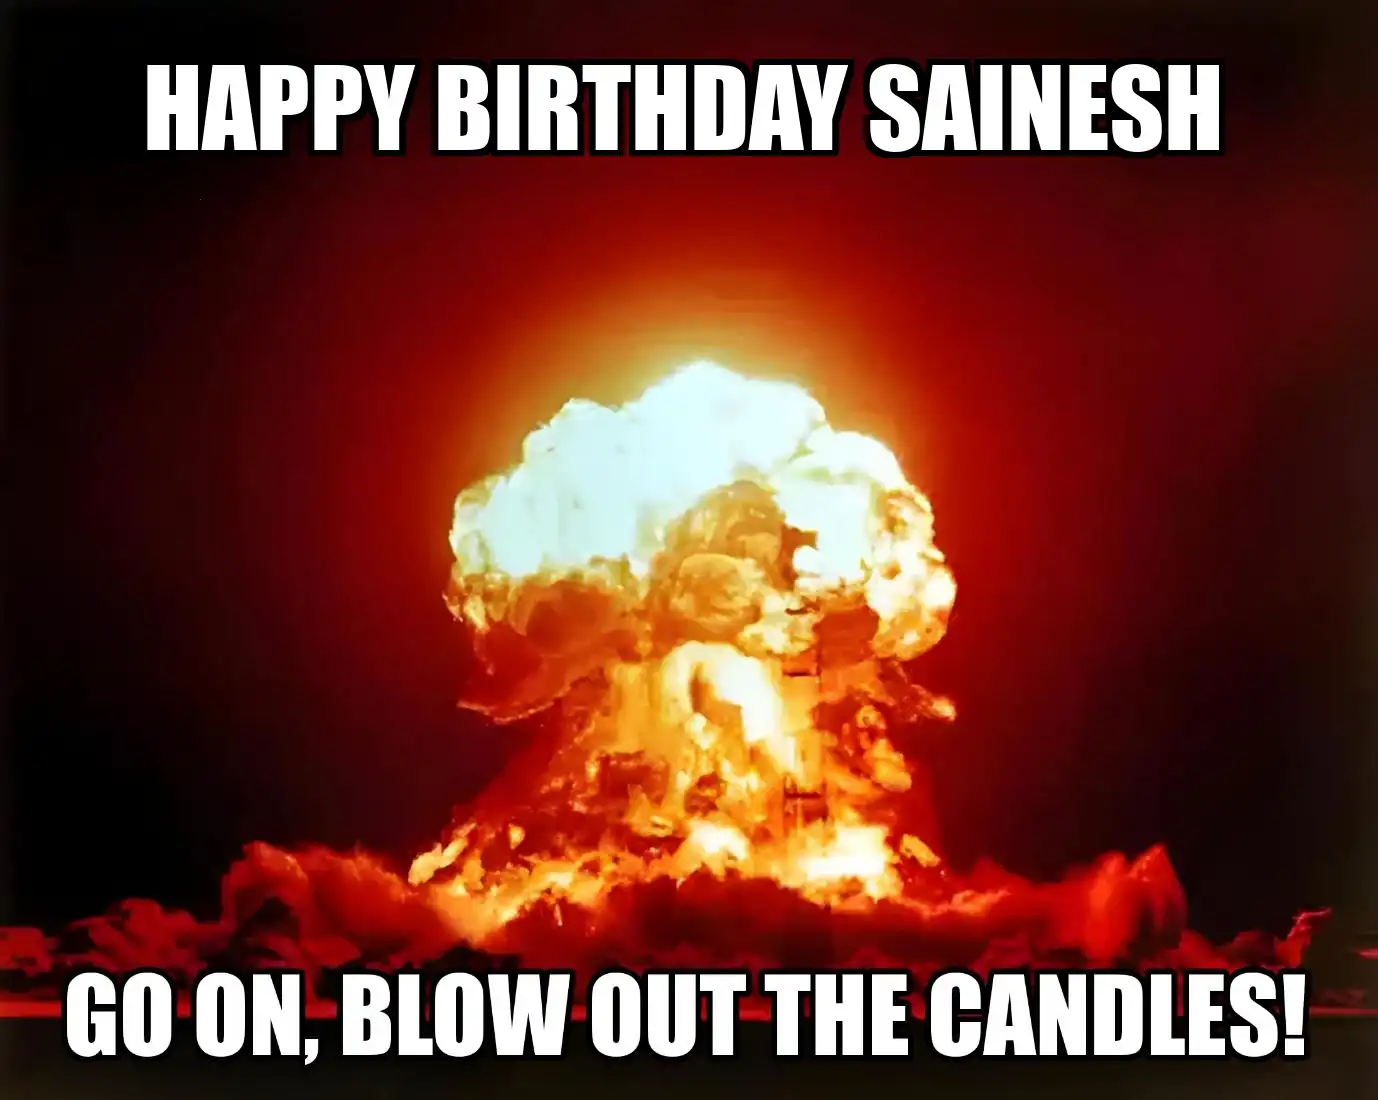 Happy Birthday Sainesh Go On Blow Out The Candles Meme